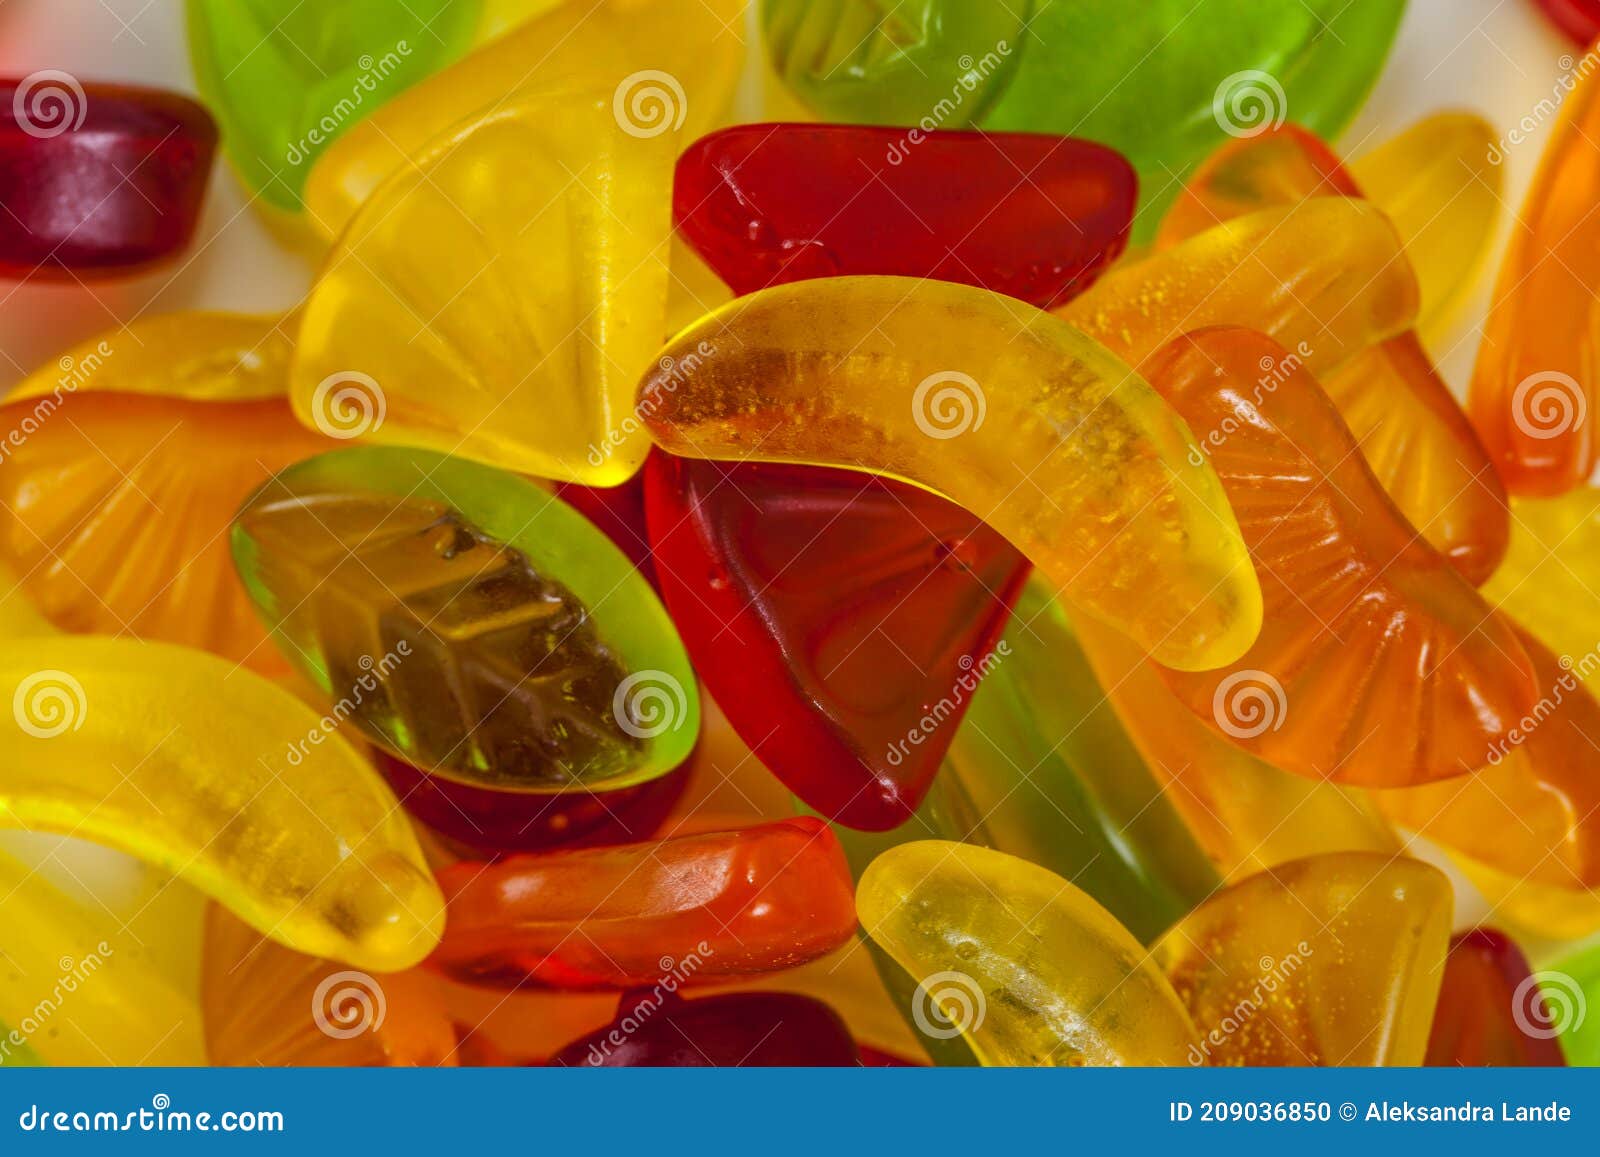 Fruit Jelly Candies Colorful Stock Photo - Image of green, candies ...